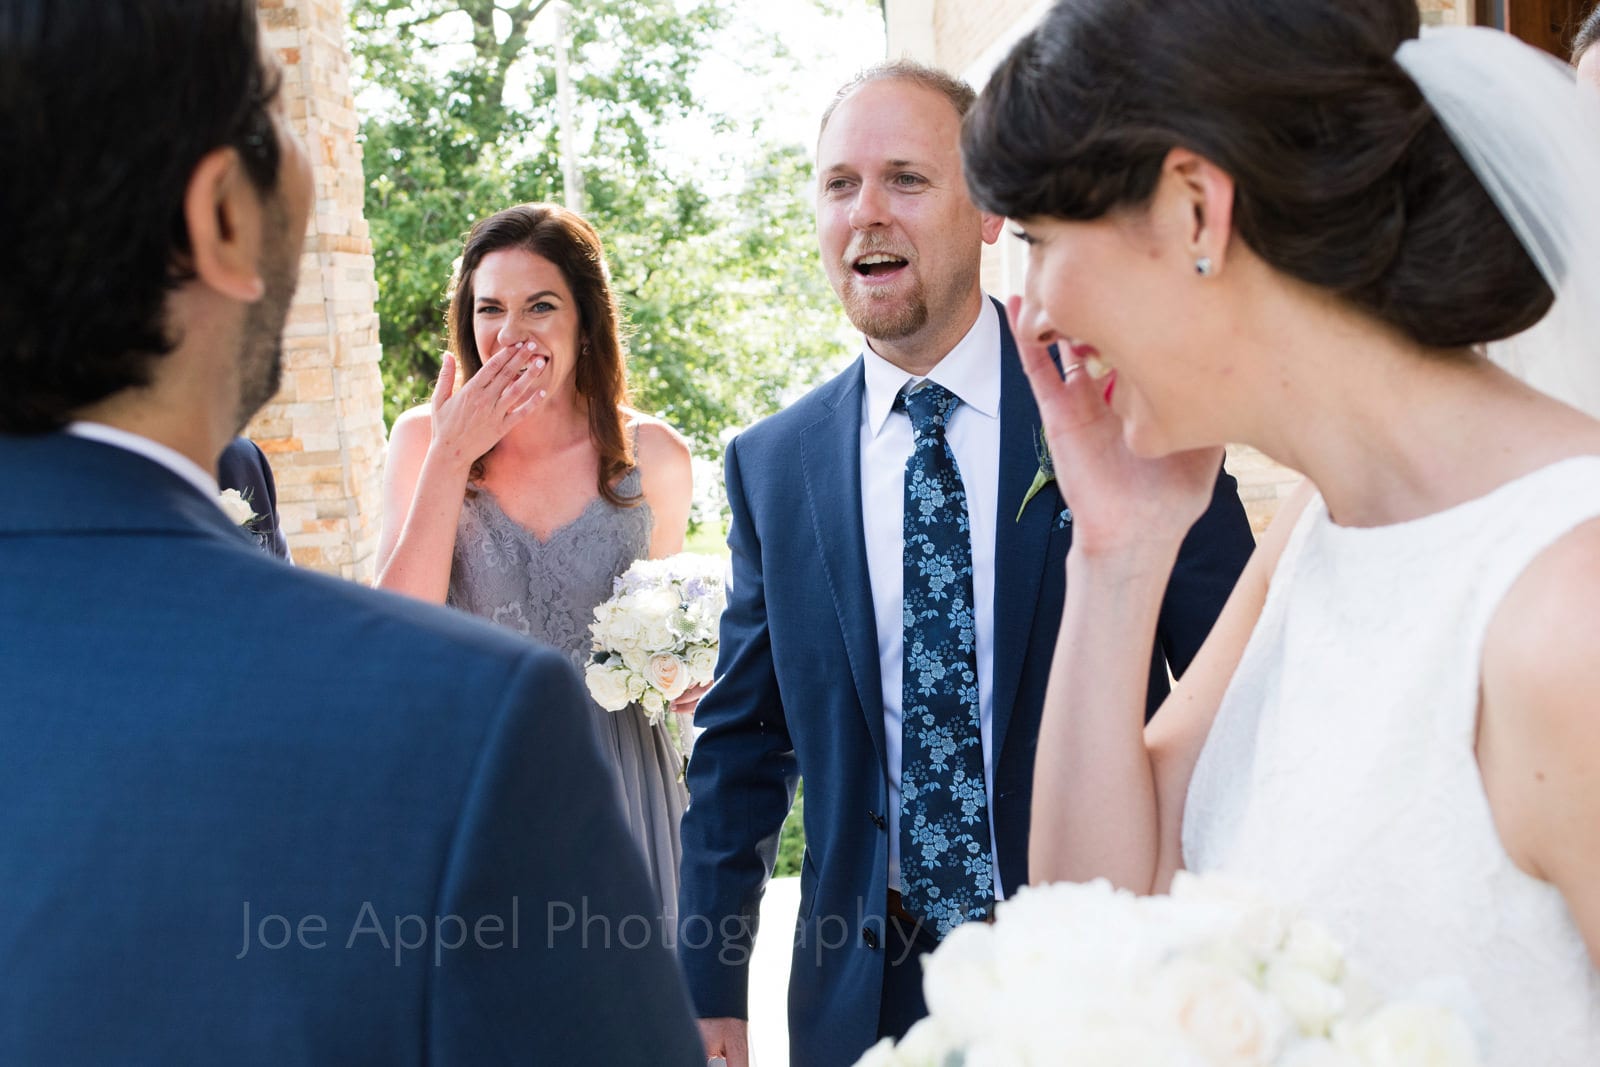 A bride wipes a tear as she and her groom are congratulated by a groomsman and a bridesmaid, who is also crying outside of St. Mary's Armenian Apostolic Church in Washington DC.